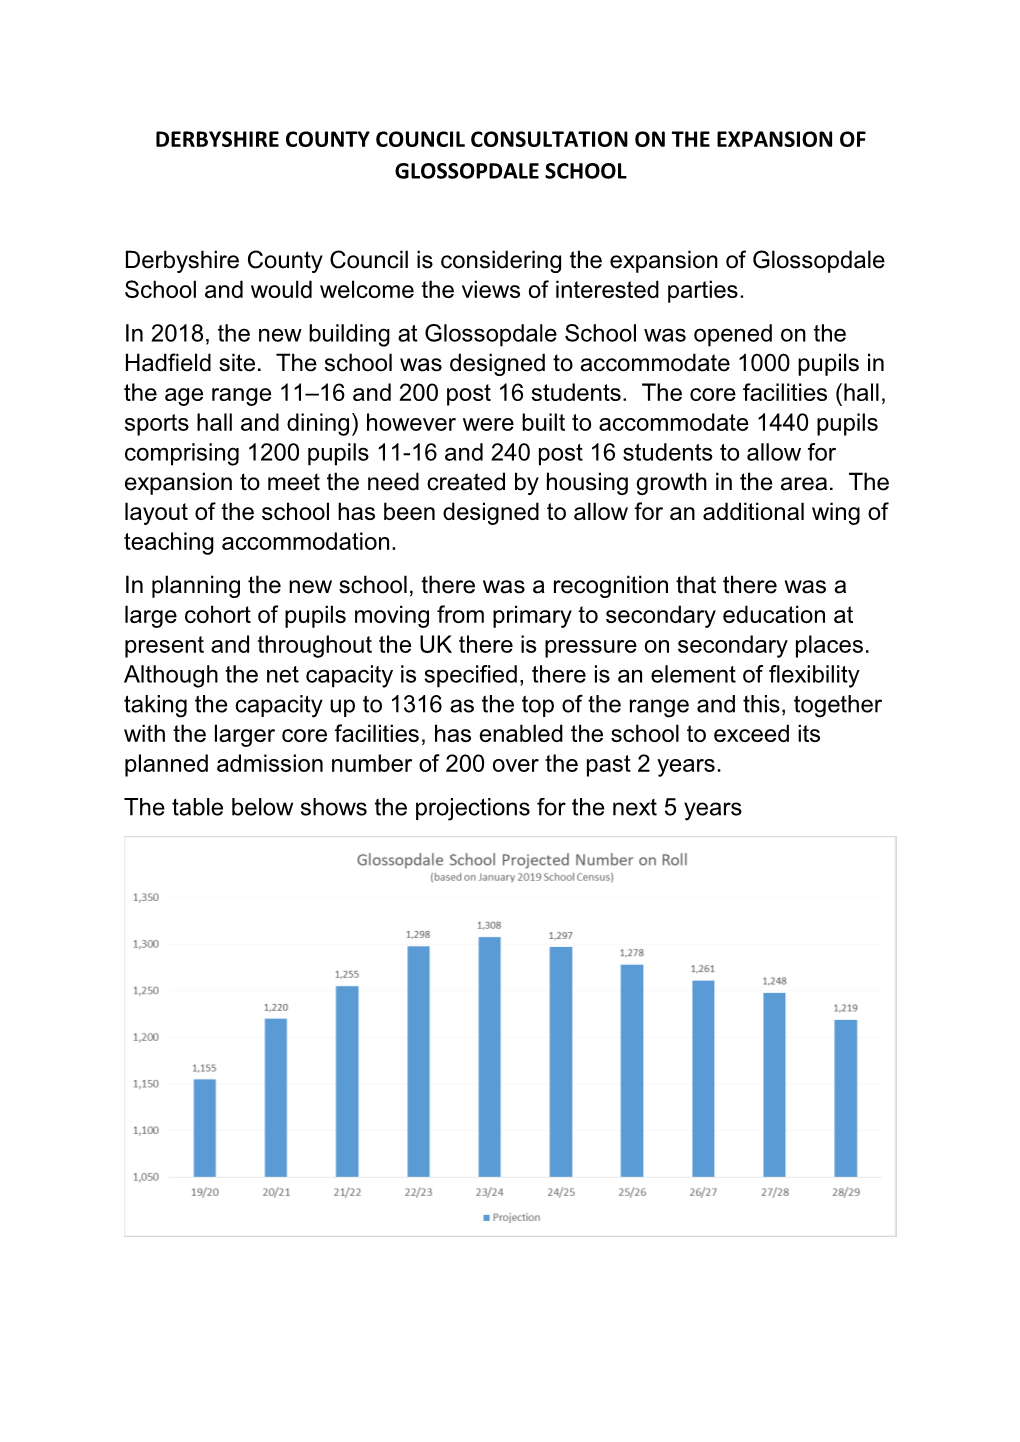 Derbyshire County Council Consultation on the Expansion of Glossopdale School